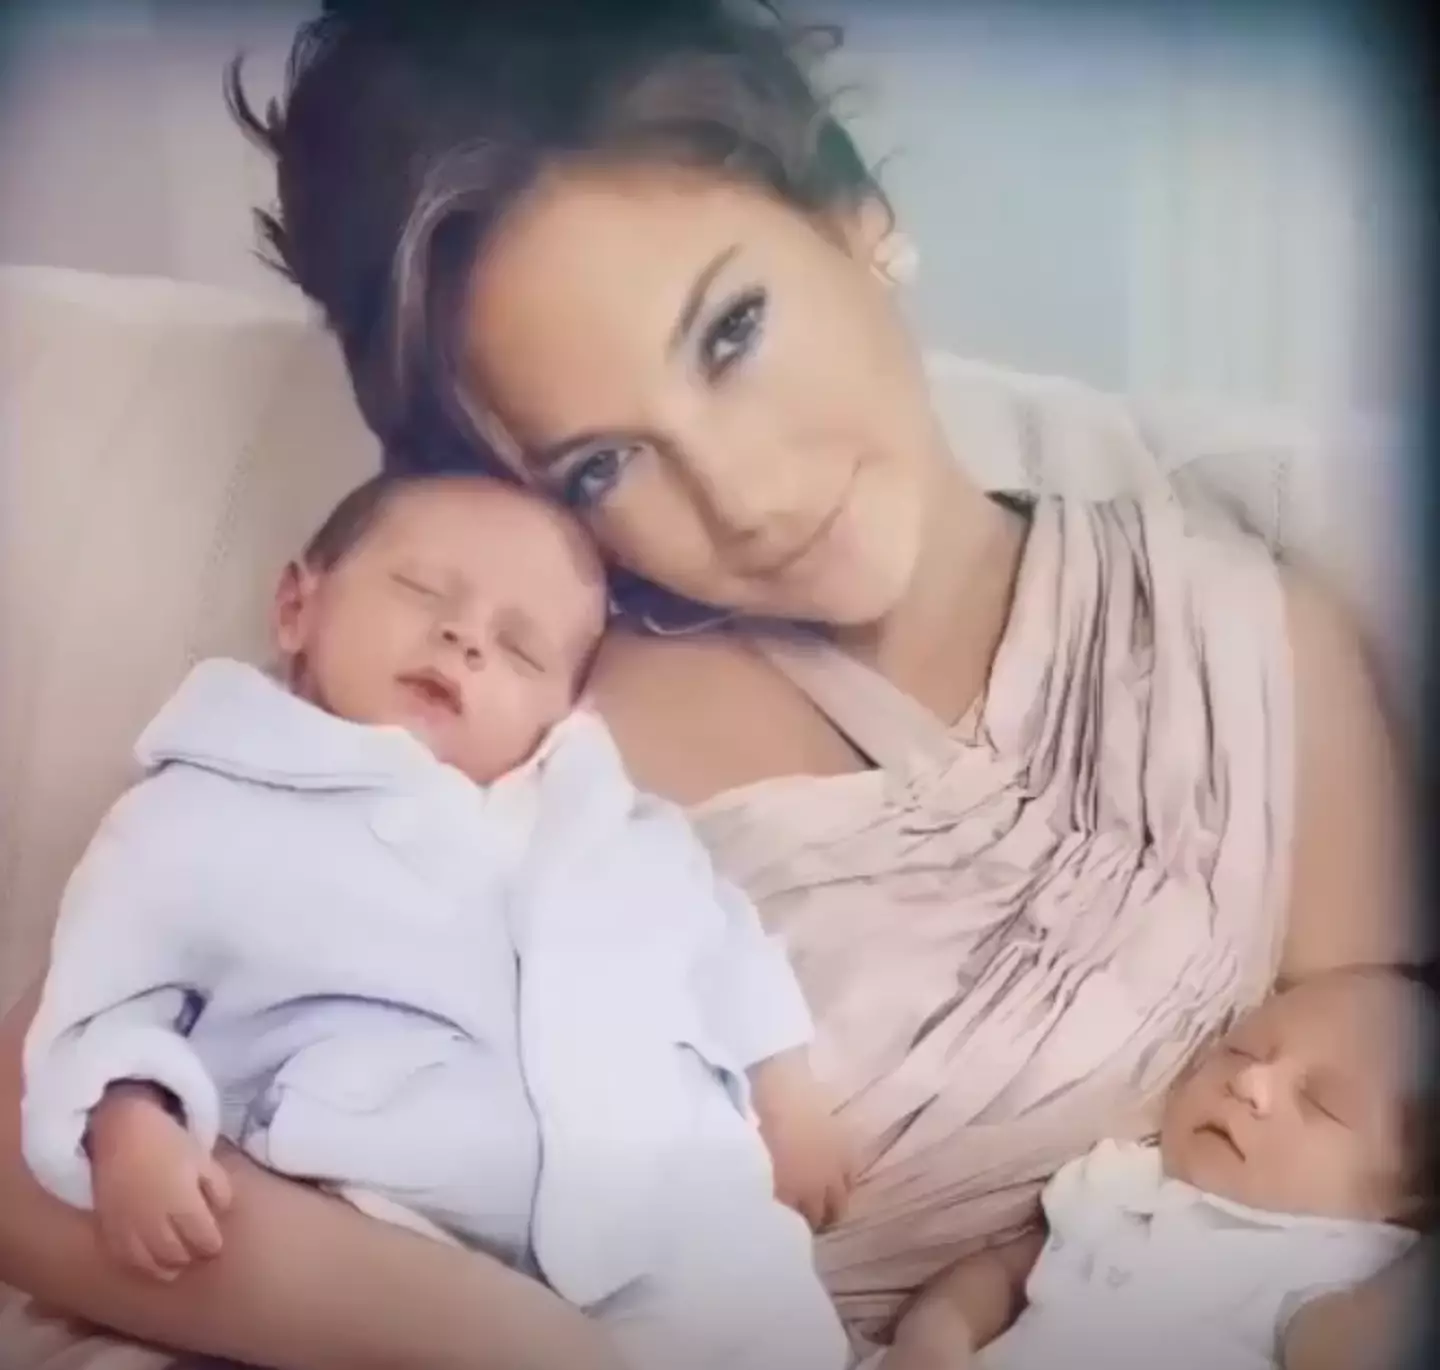 J.Lo rarely shares pictures of her twins, who are now 15.